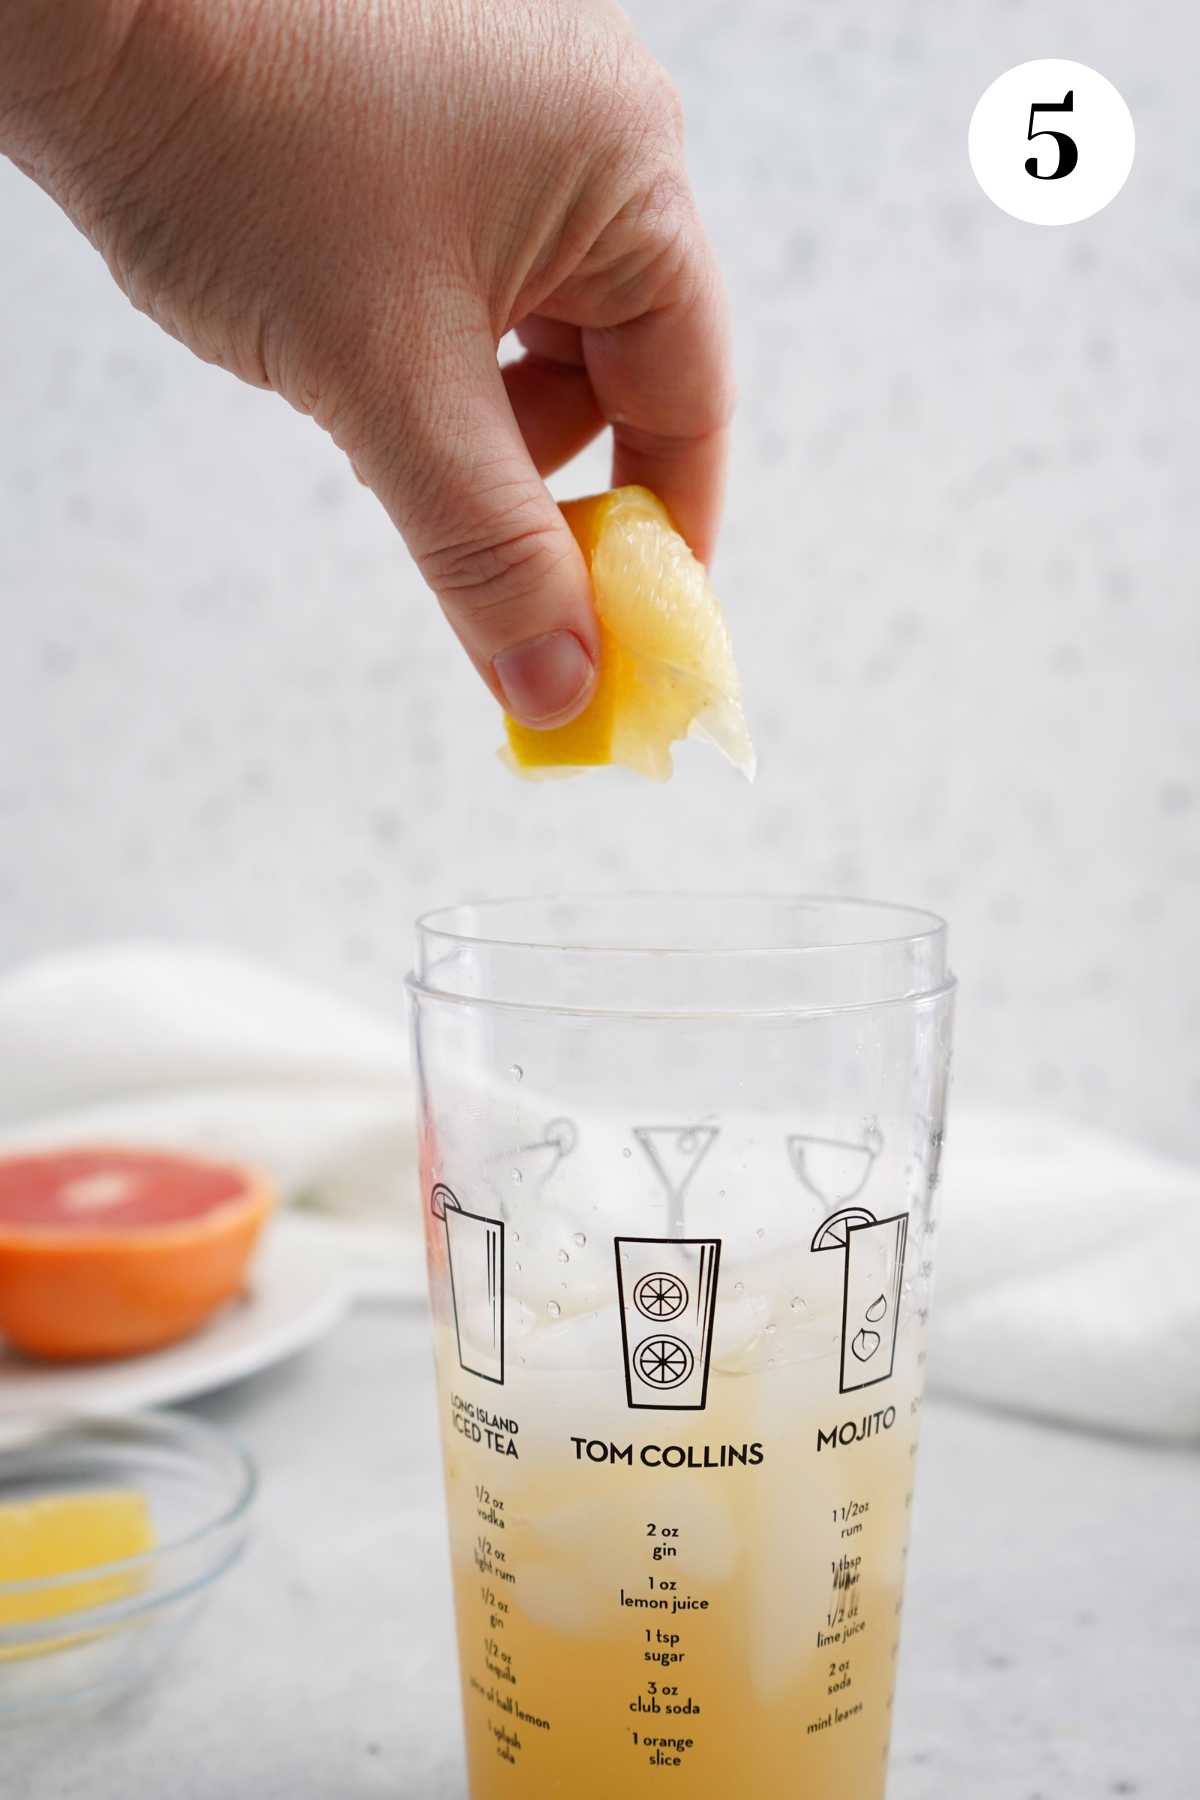 Squeezing the fresh lemon into the shaker glass.